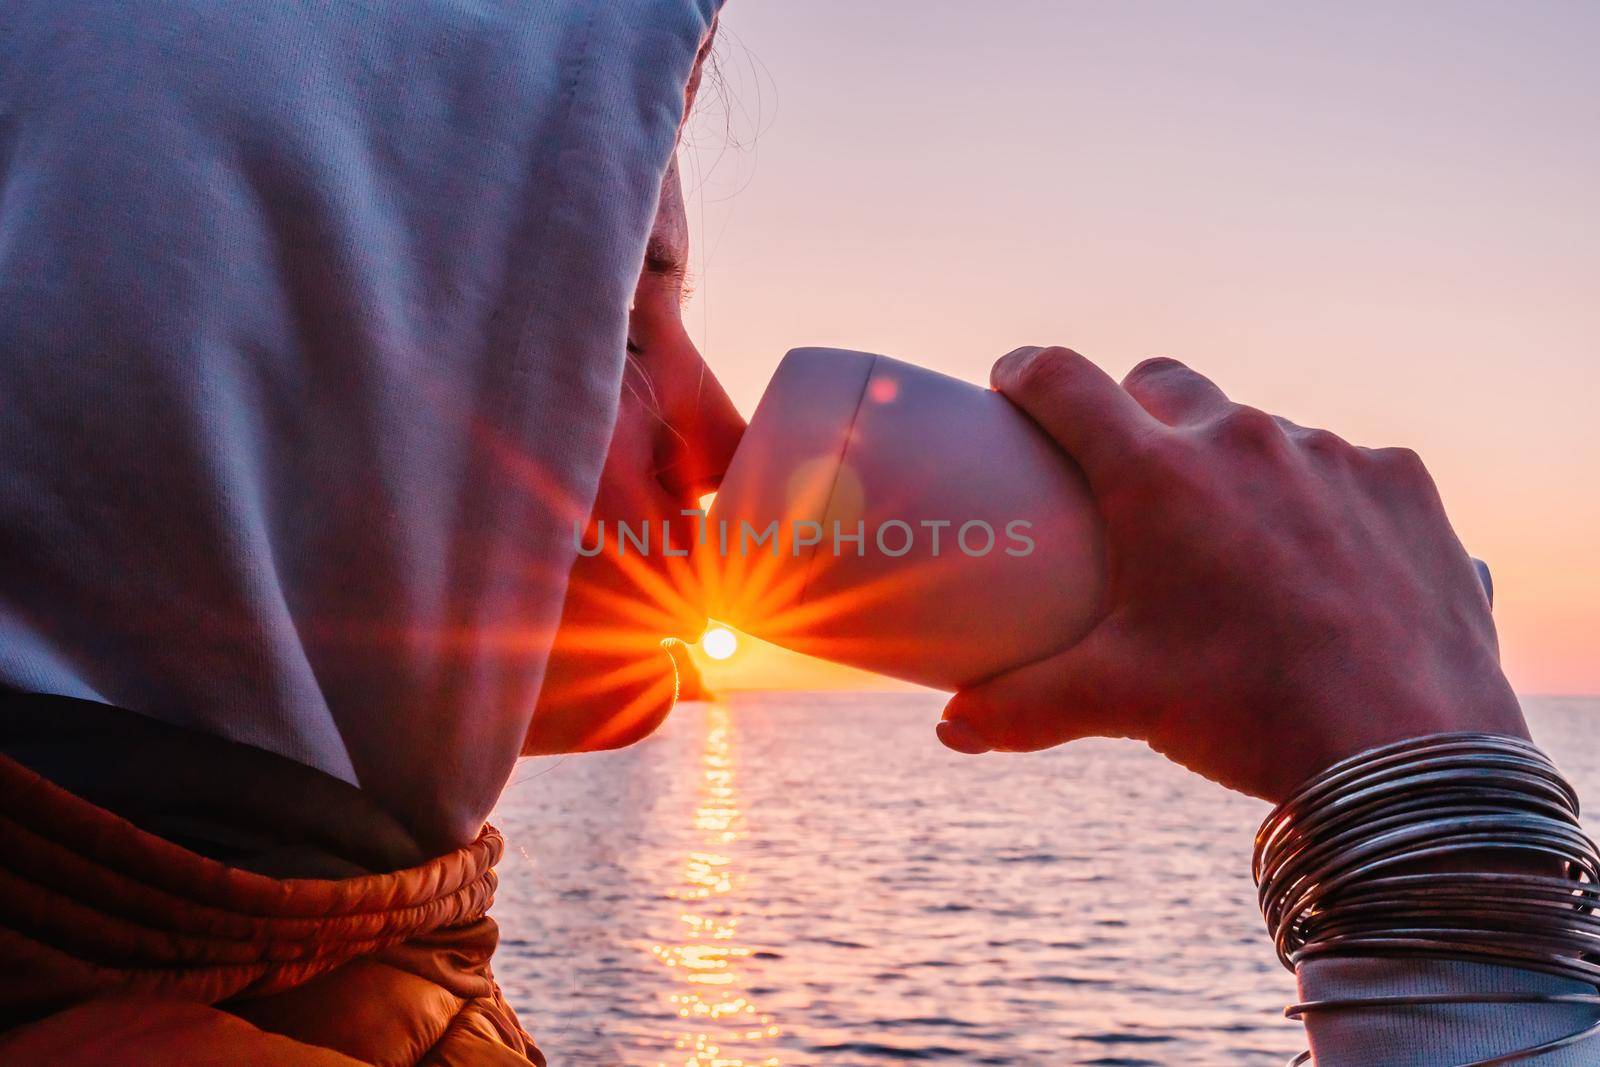 A young tourist Woman holding coffee tumbler cup while sitting outdoor and enjoying sunrise over sea mountain landscape. Women's yoga fitness routine. Healthy lifestyle, harmony and meditation by panophotograph